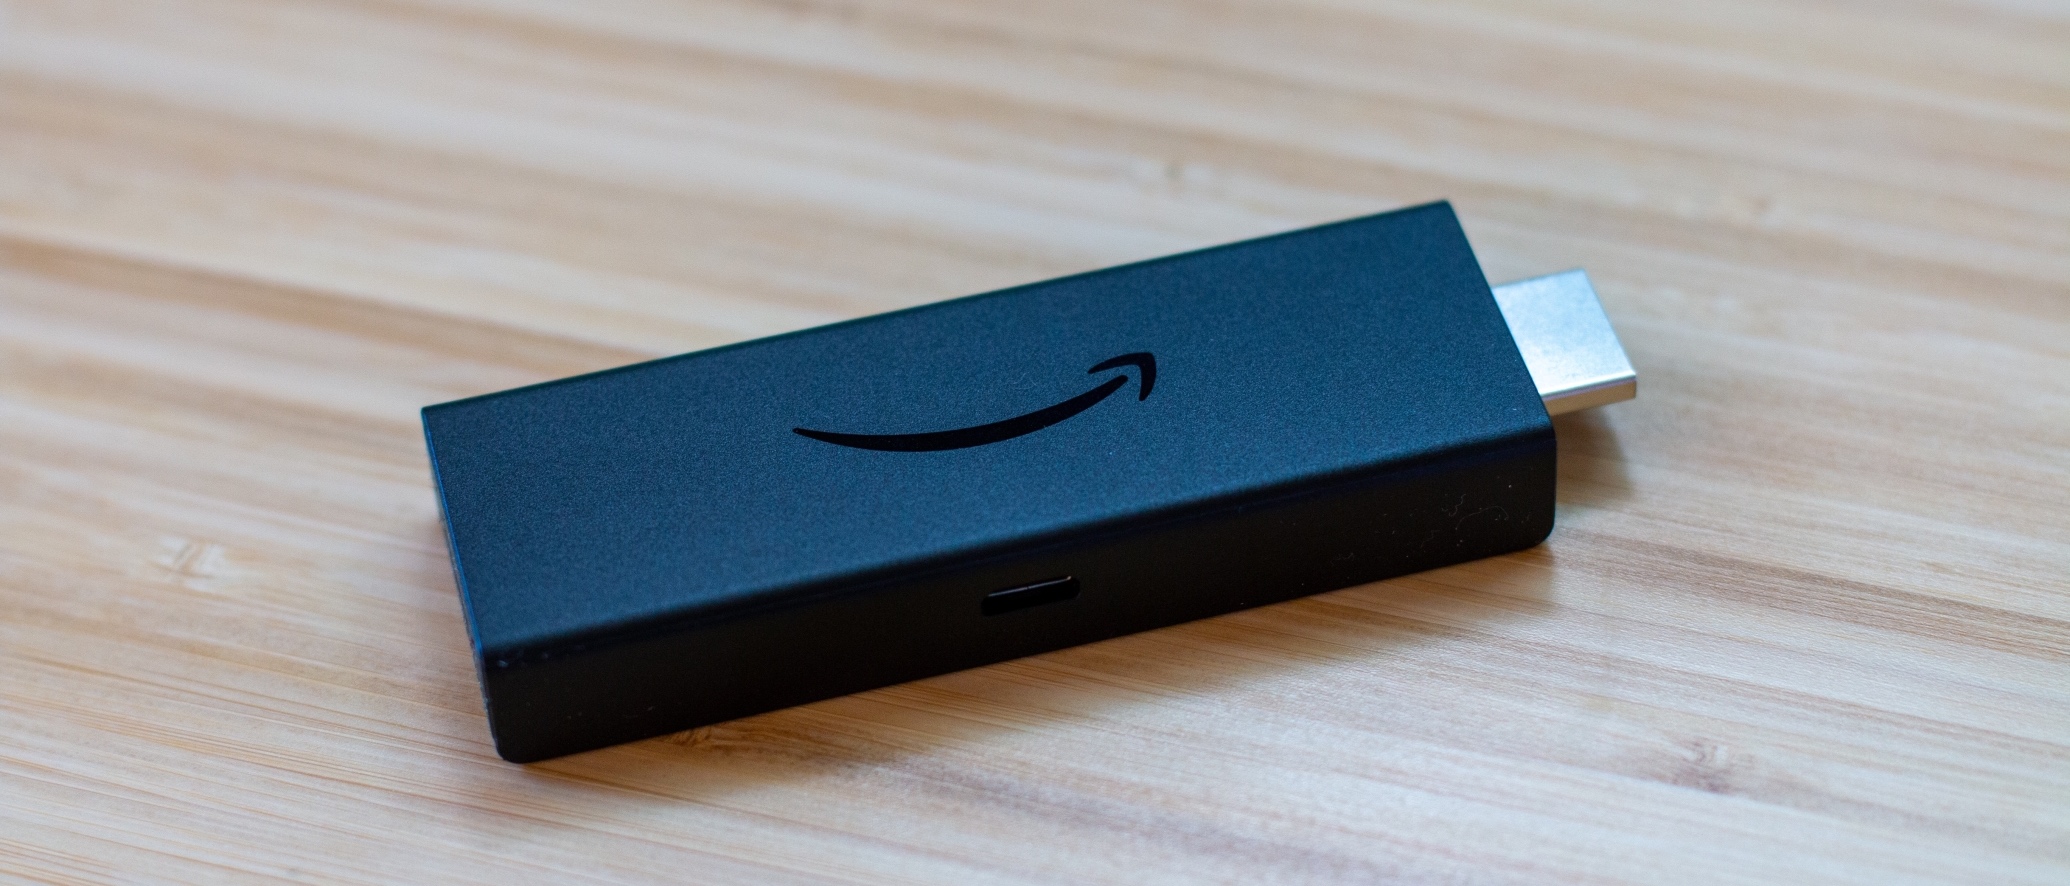 s Fire TV Stick 4K review: serious streaming from a supreme dongle